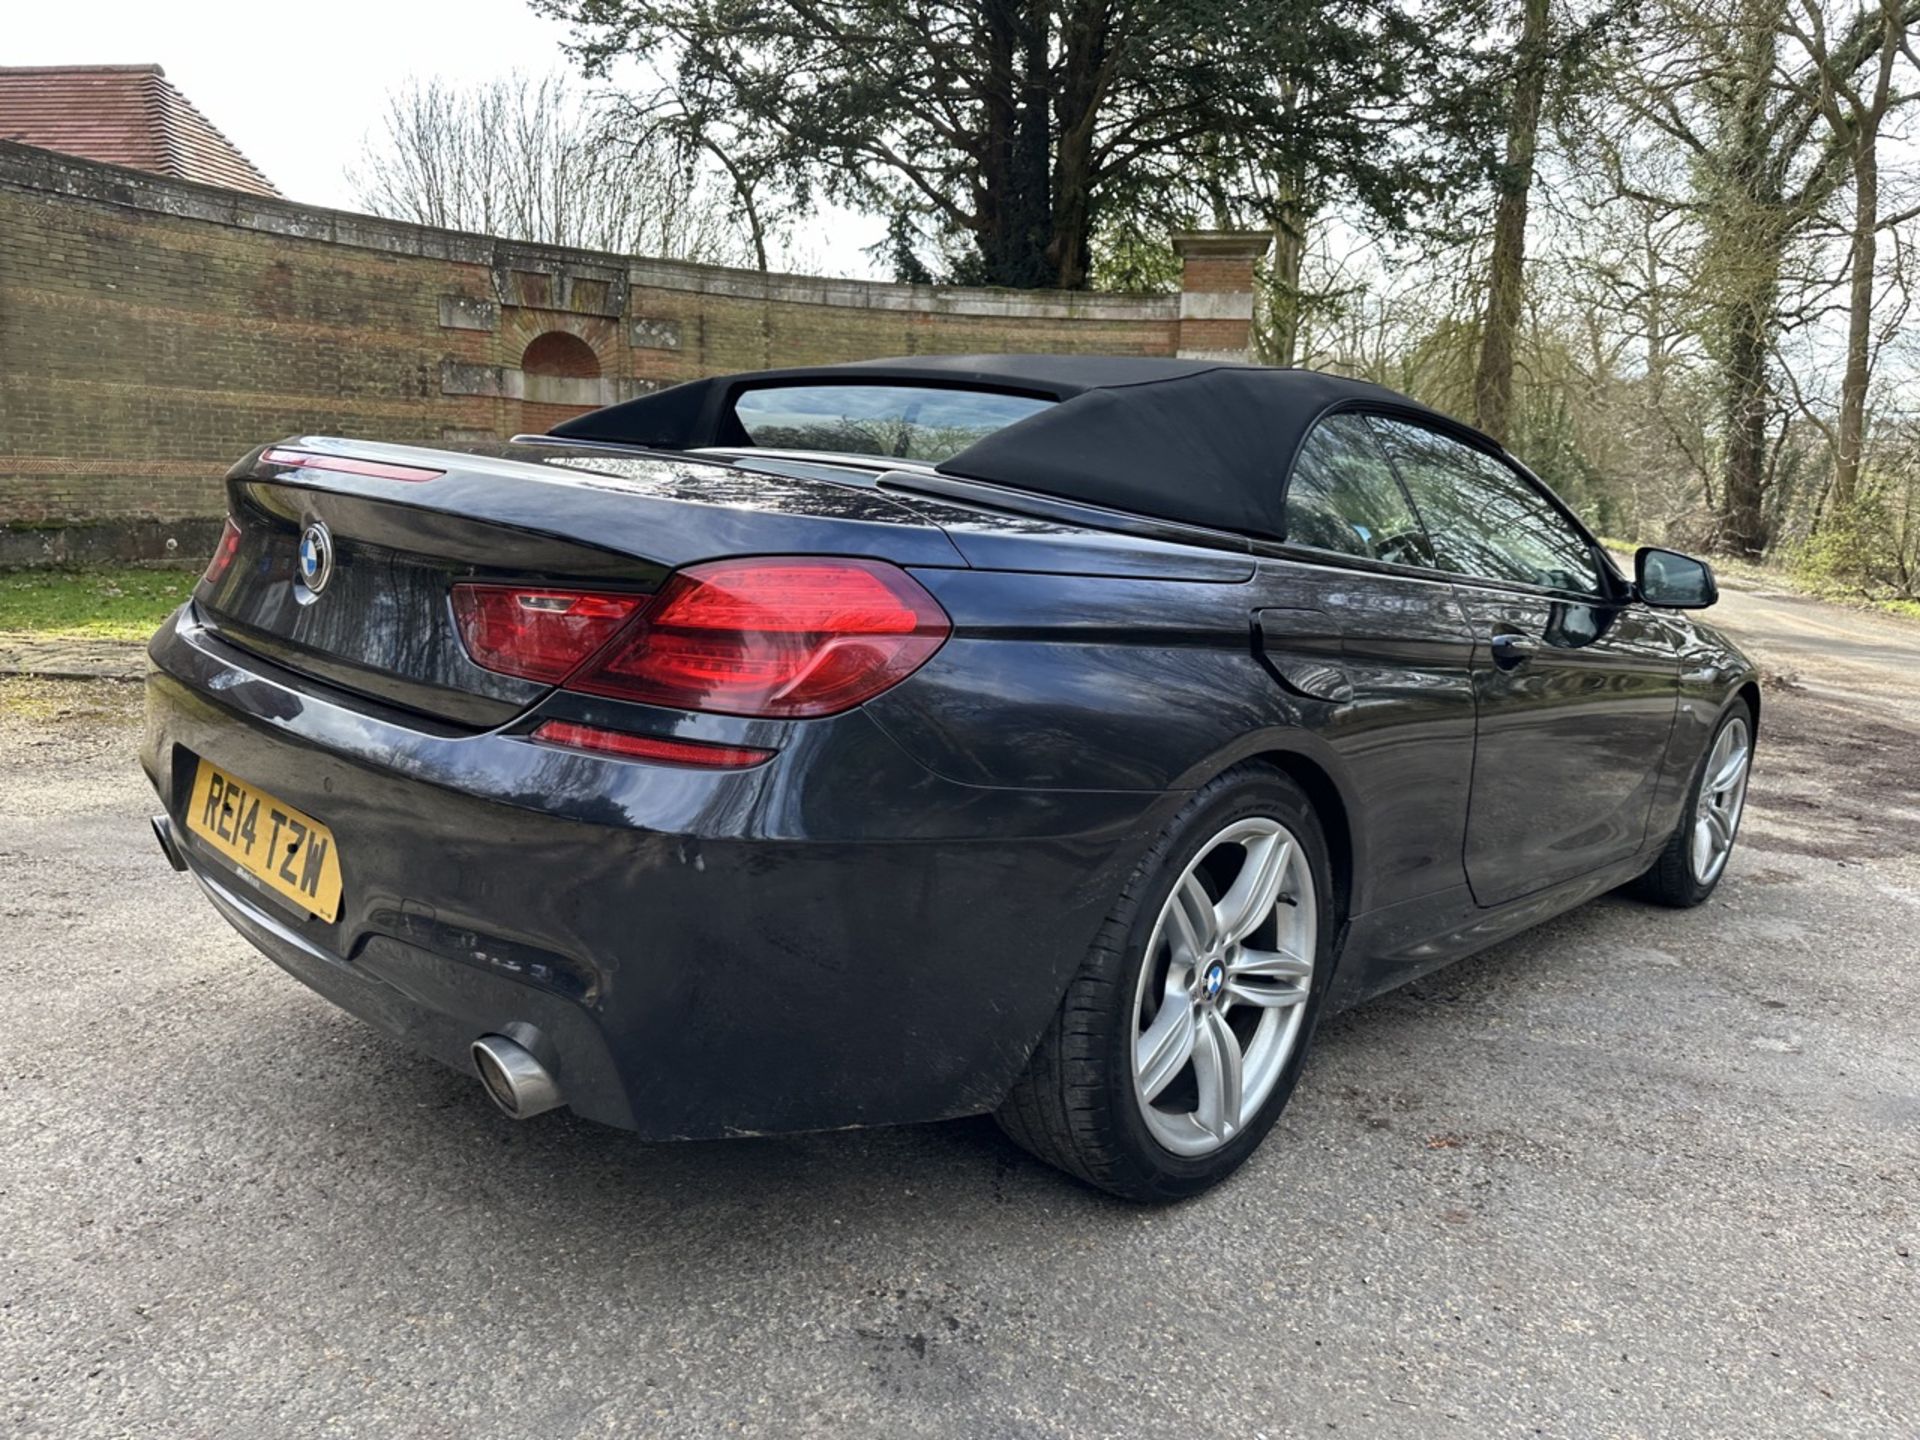 (RESERVE MET) BMW 6 SERIES 640d (M SPORT) Ultimate Summer Car - AUTOMATIC - Convertible - 2014 - Image 4 of 22